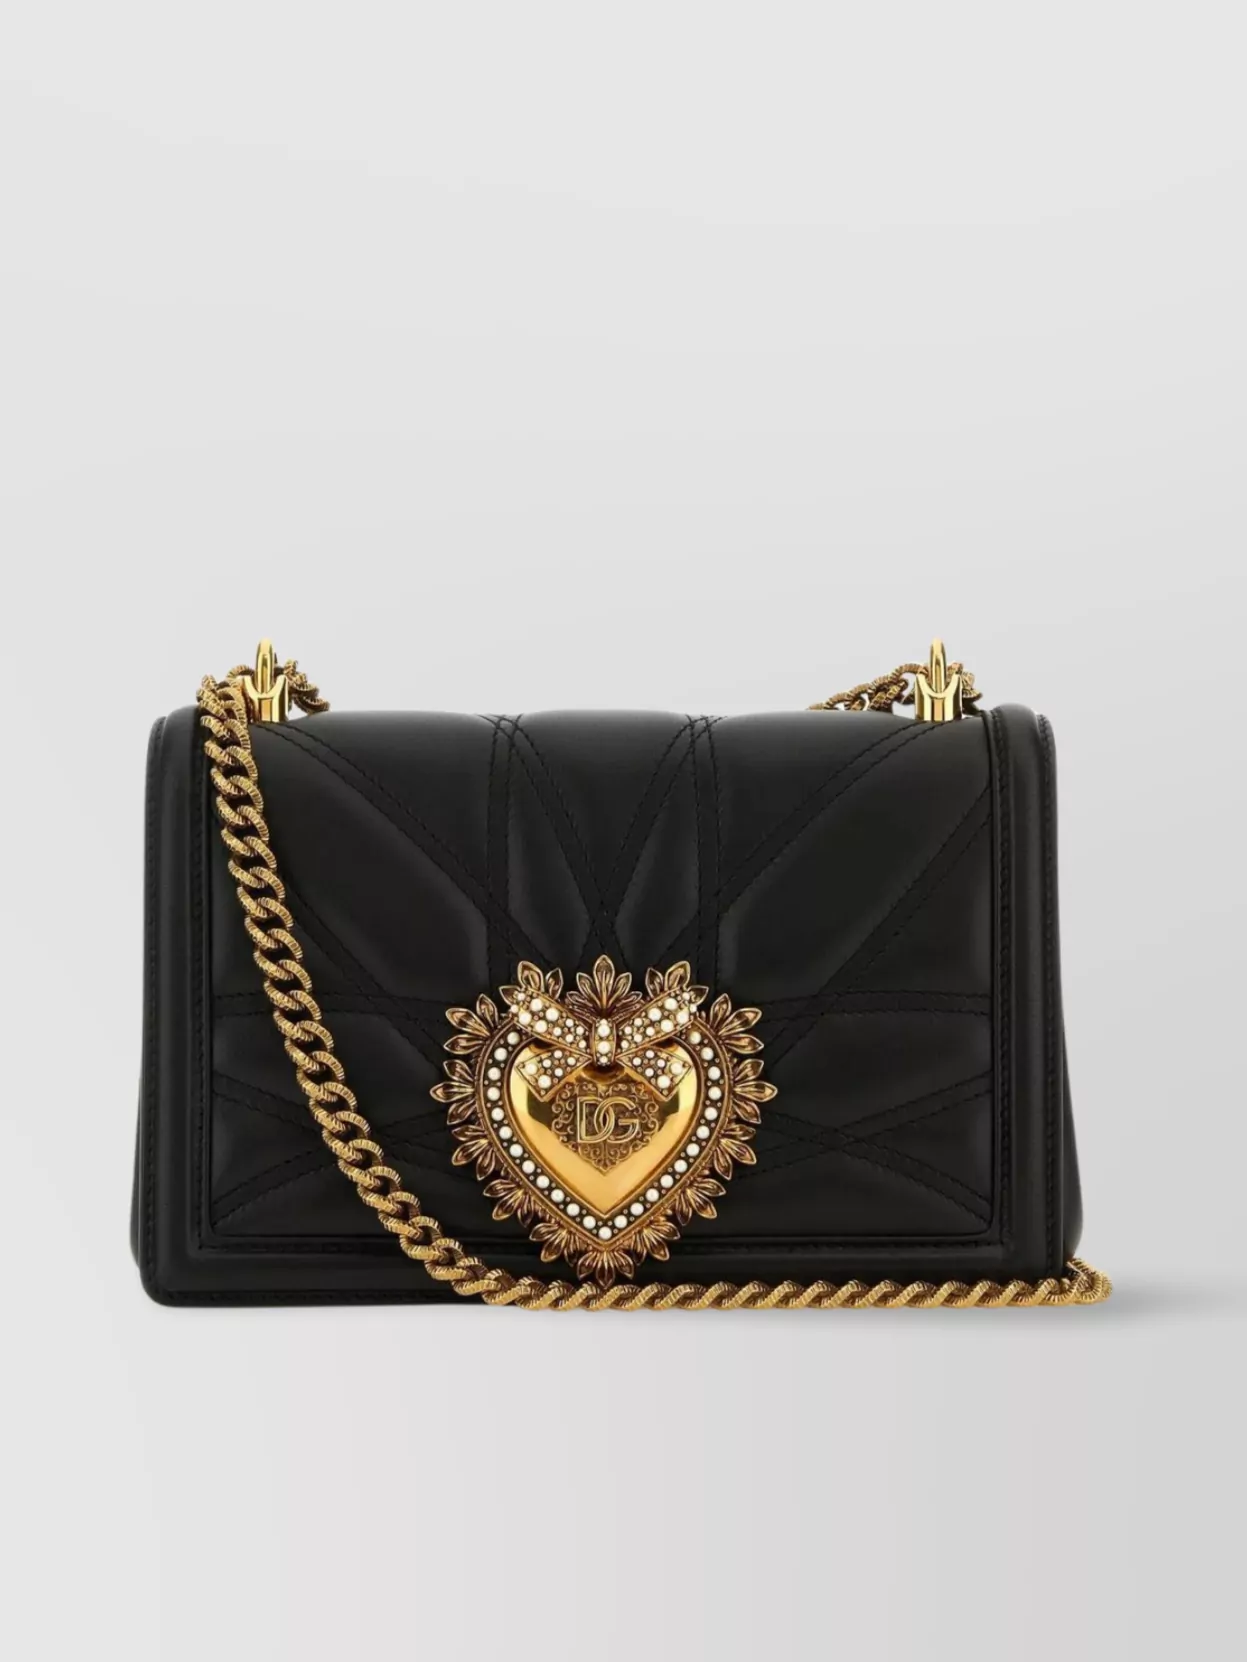 DOLCE & GABBANA NAPPA LEATHER QUILTED CROSS-BODY BAG